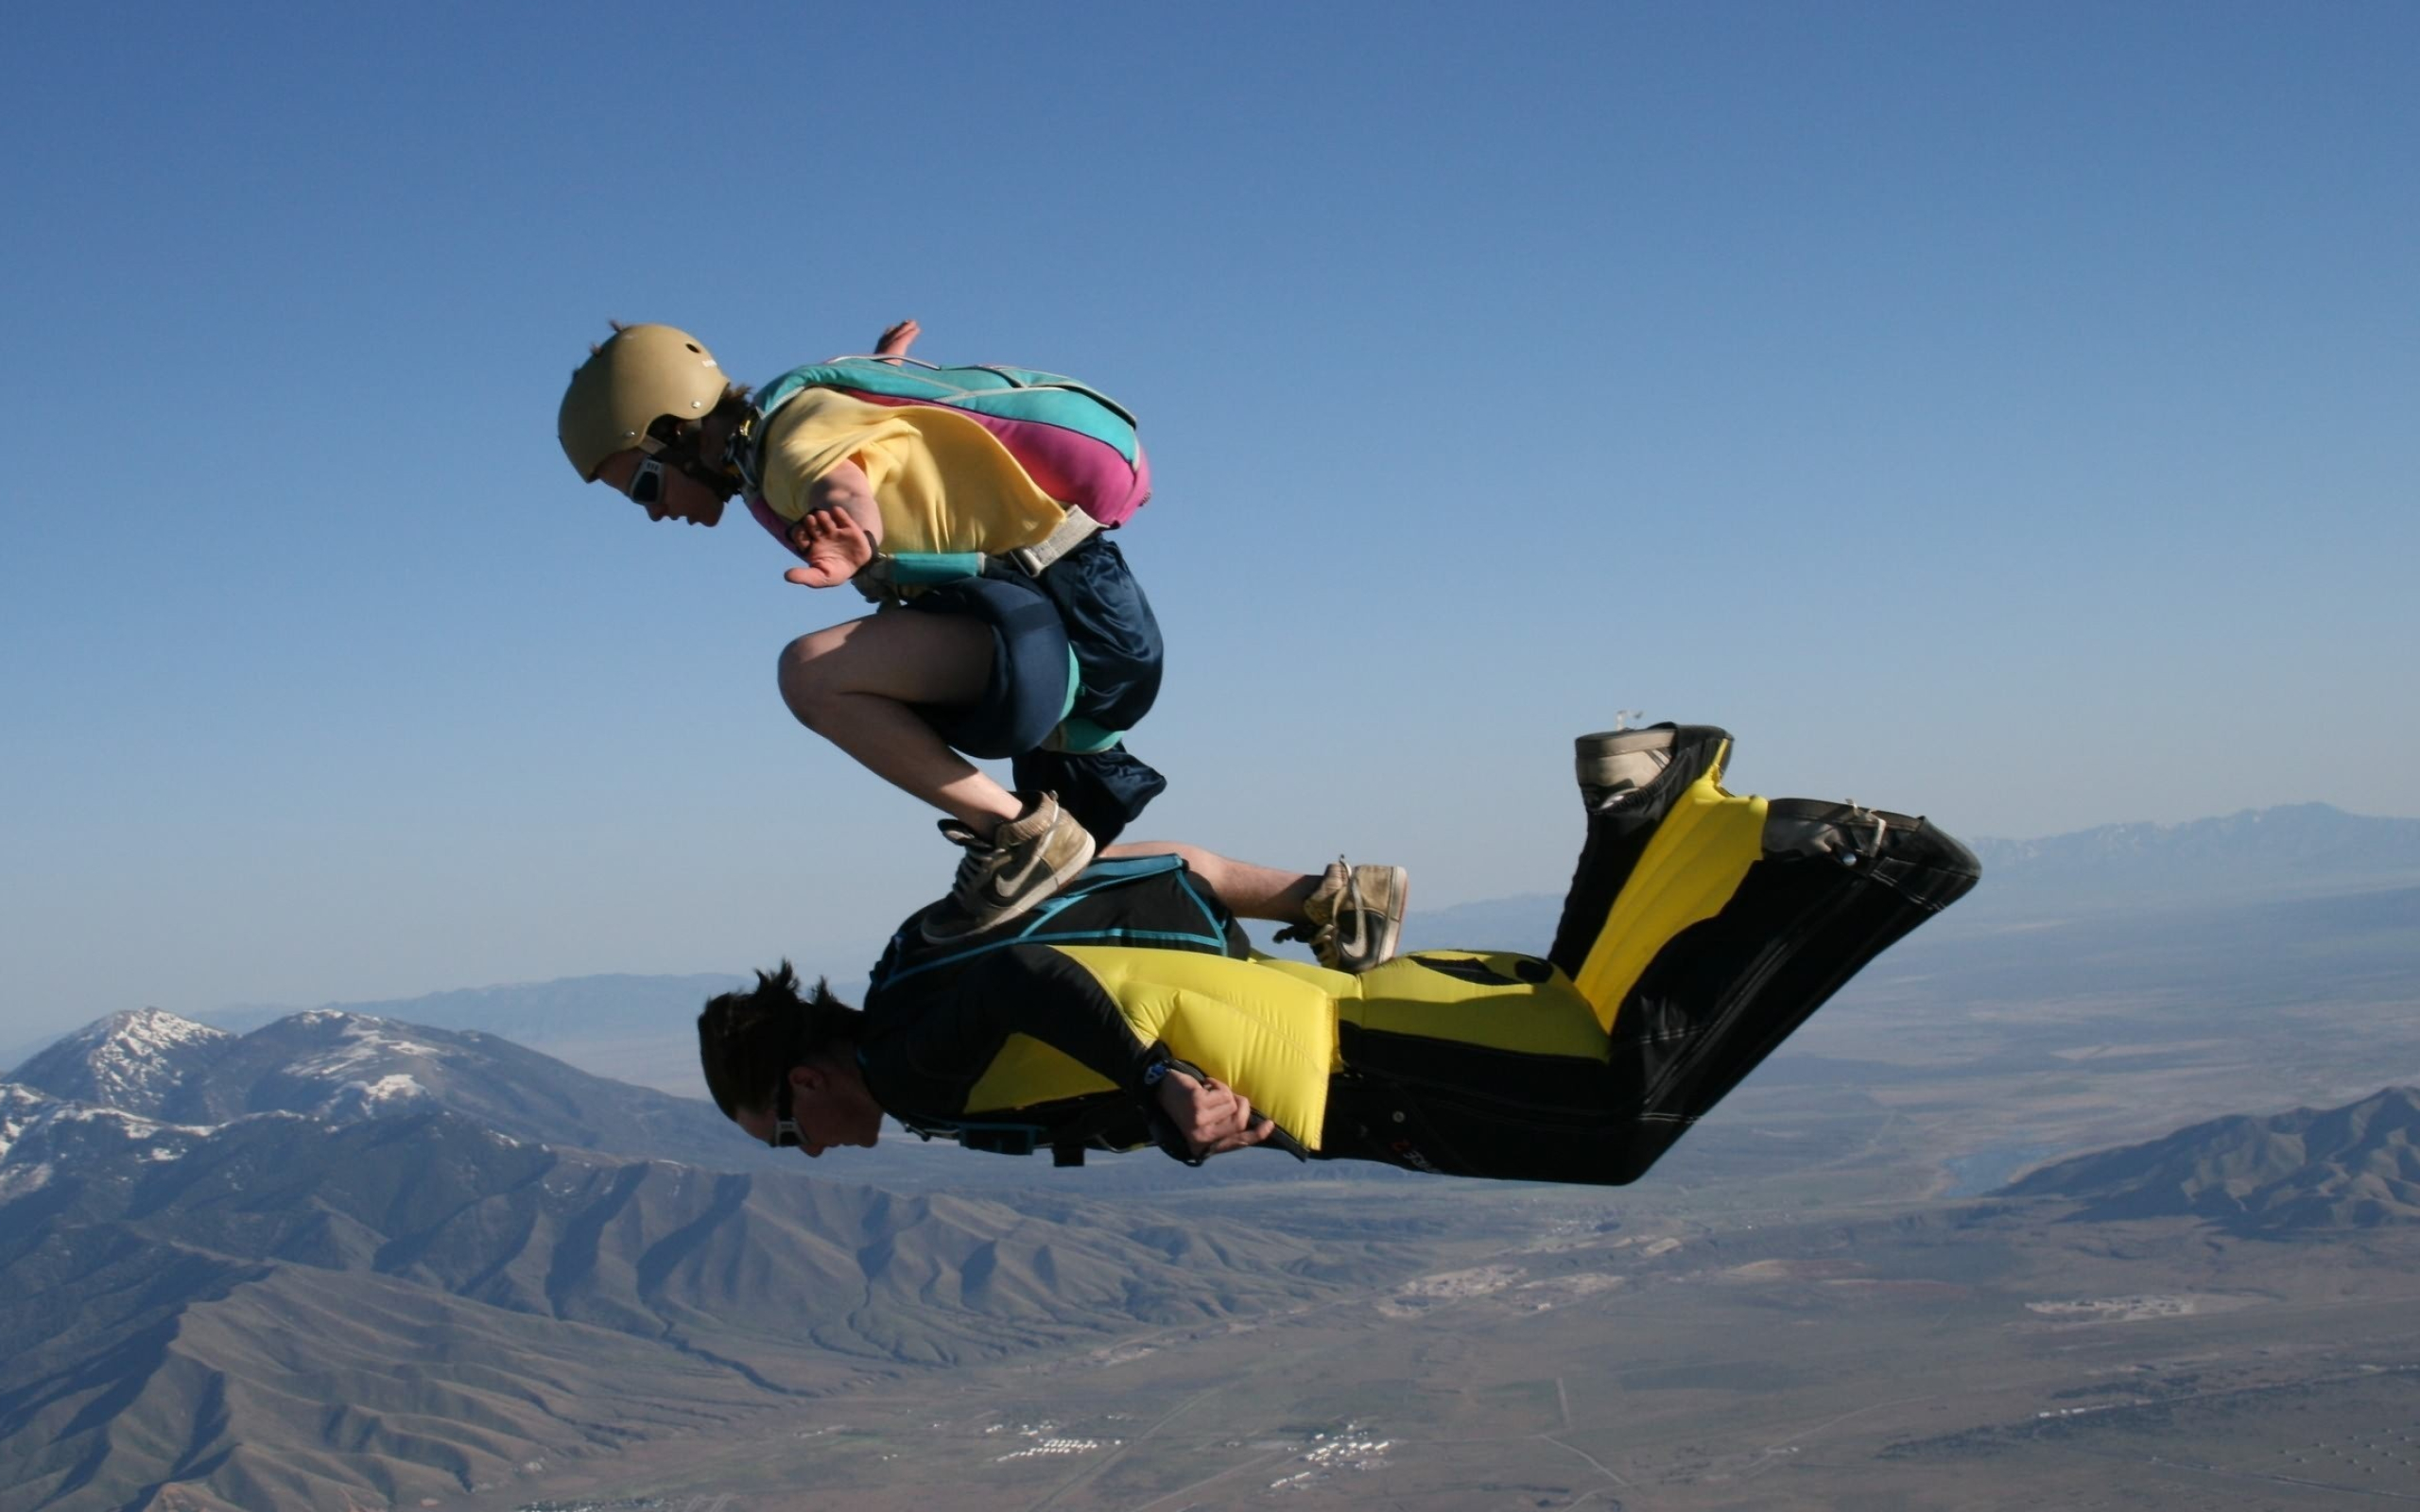 Parachuting: Tandem skydiving, Freestyle wingsuiting, Extremely dangerous sport. 2560x1600 HD Background.